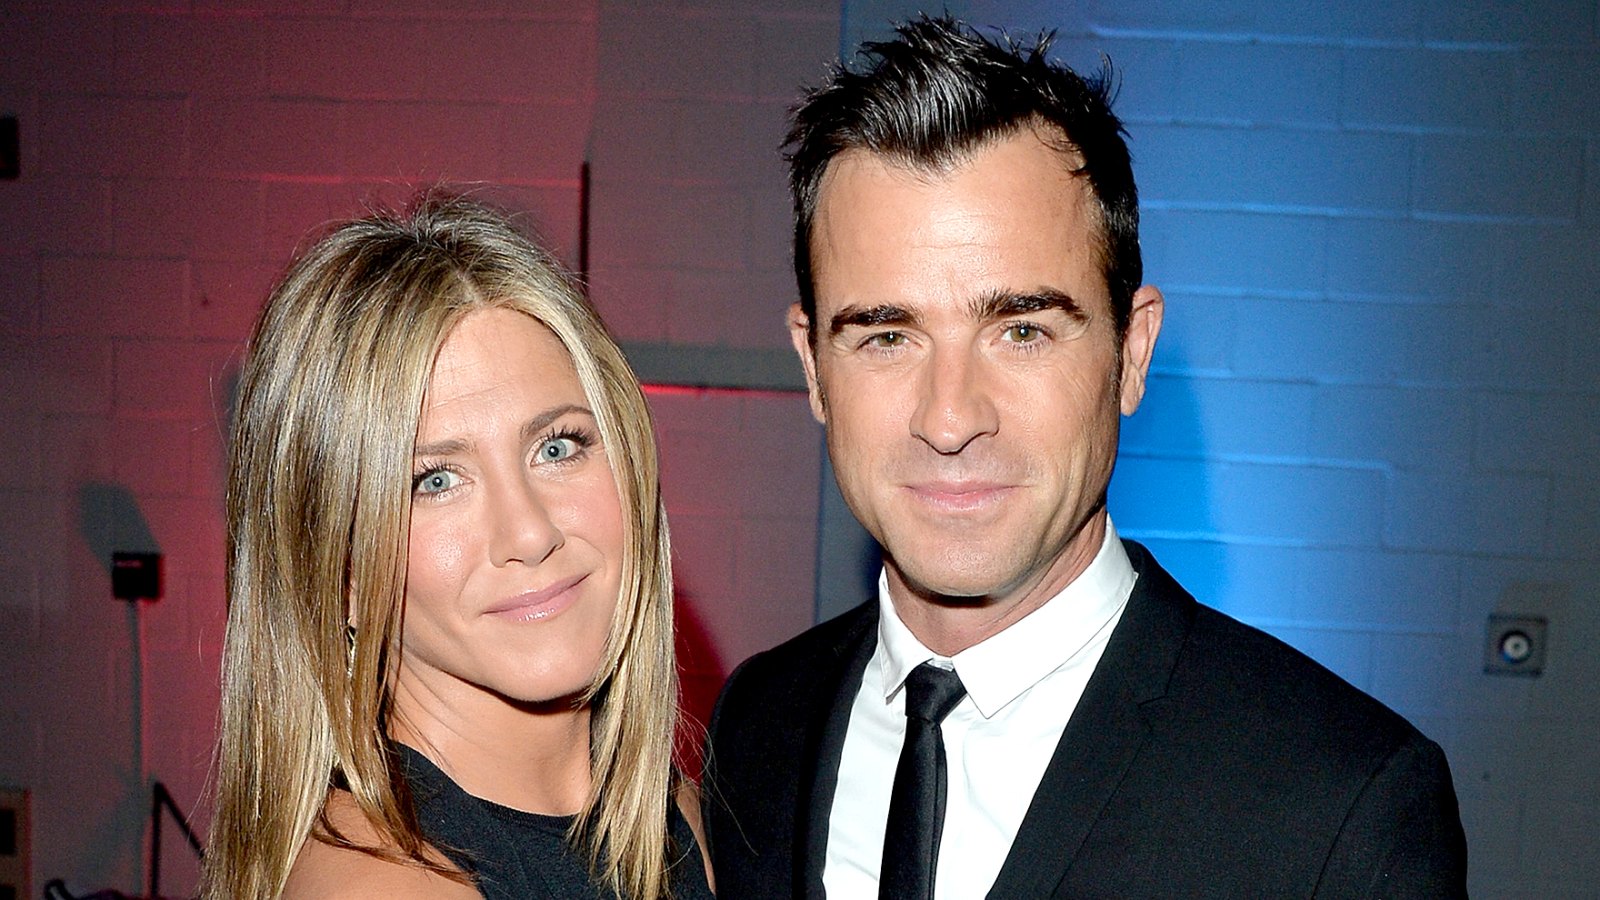 Jennifer Aniston and Justin Theroux attend the "Cake" premiere during the 2014 Toronto International Film Festival.